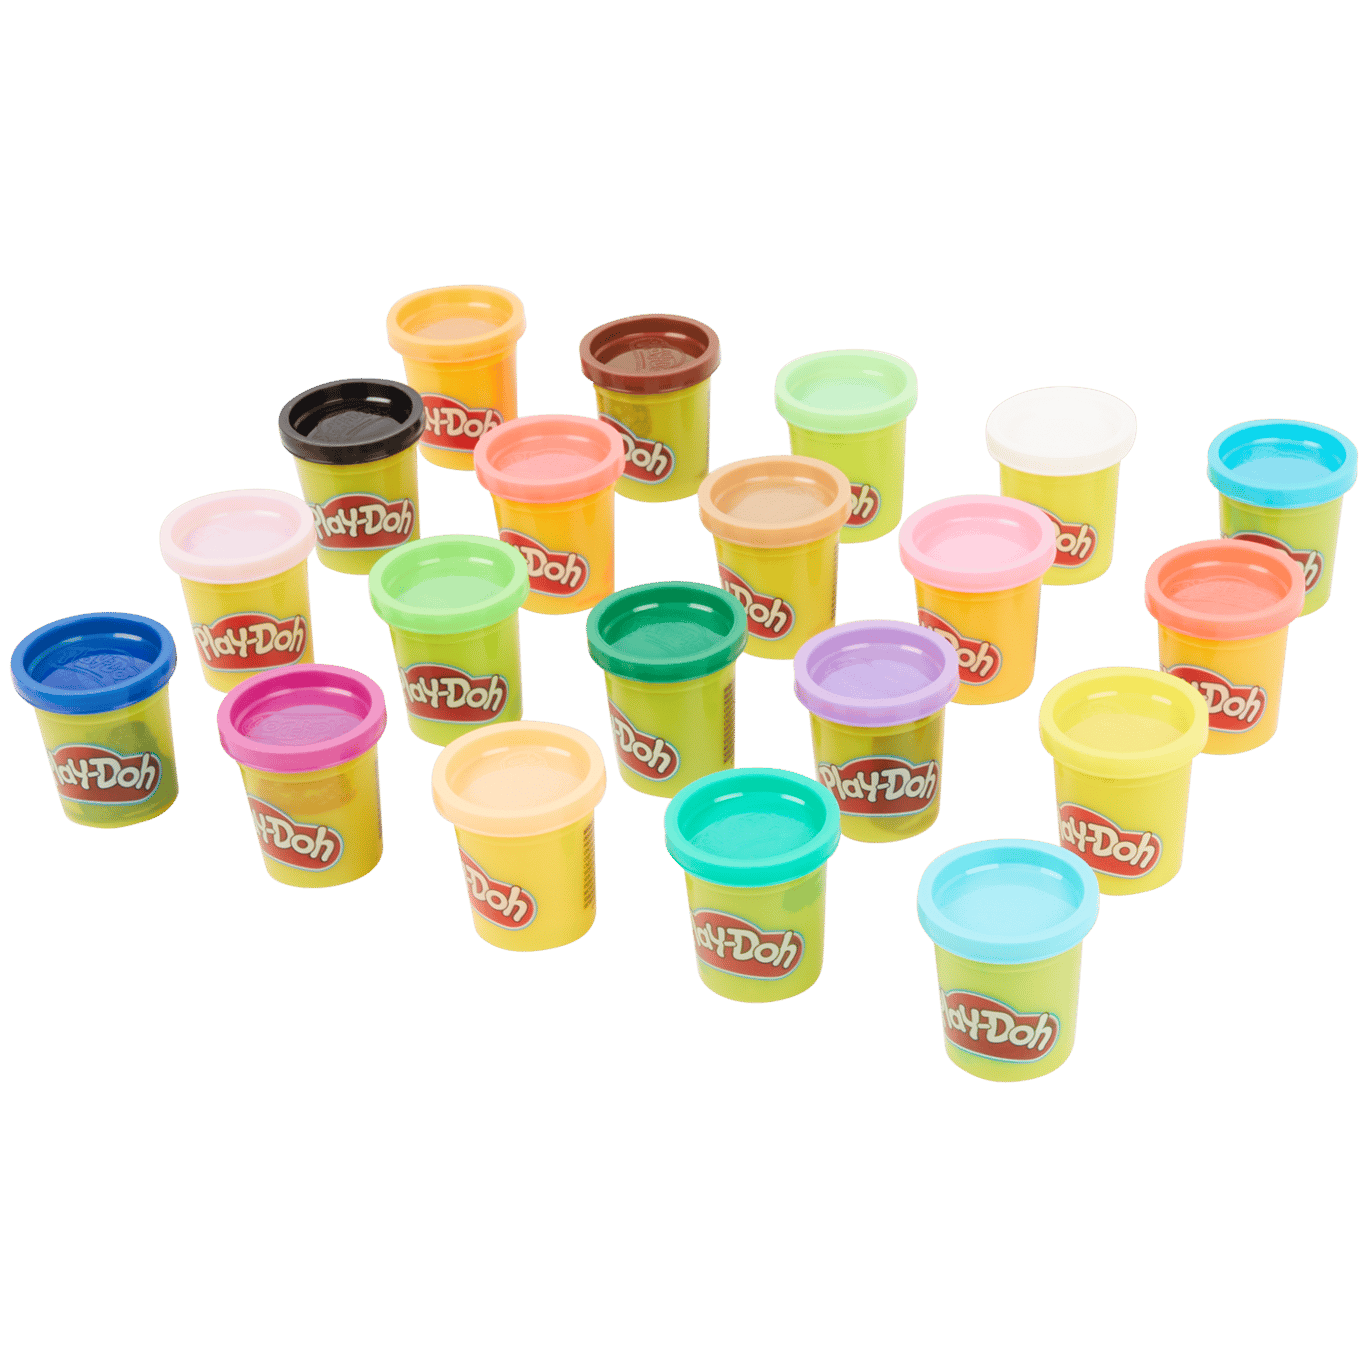 Play-Doh Multicolor Magic Pack